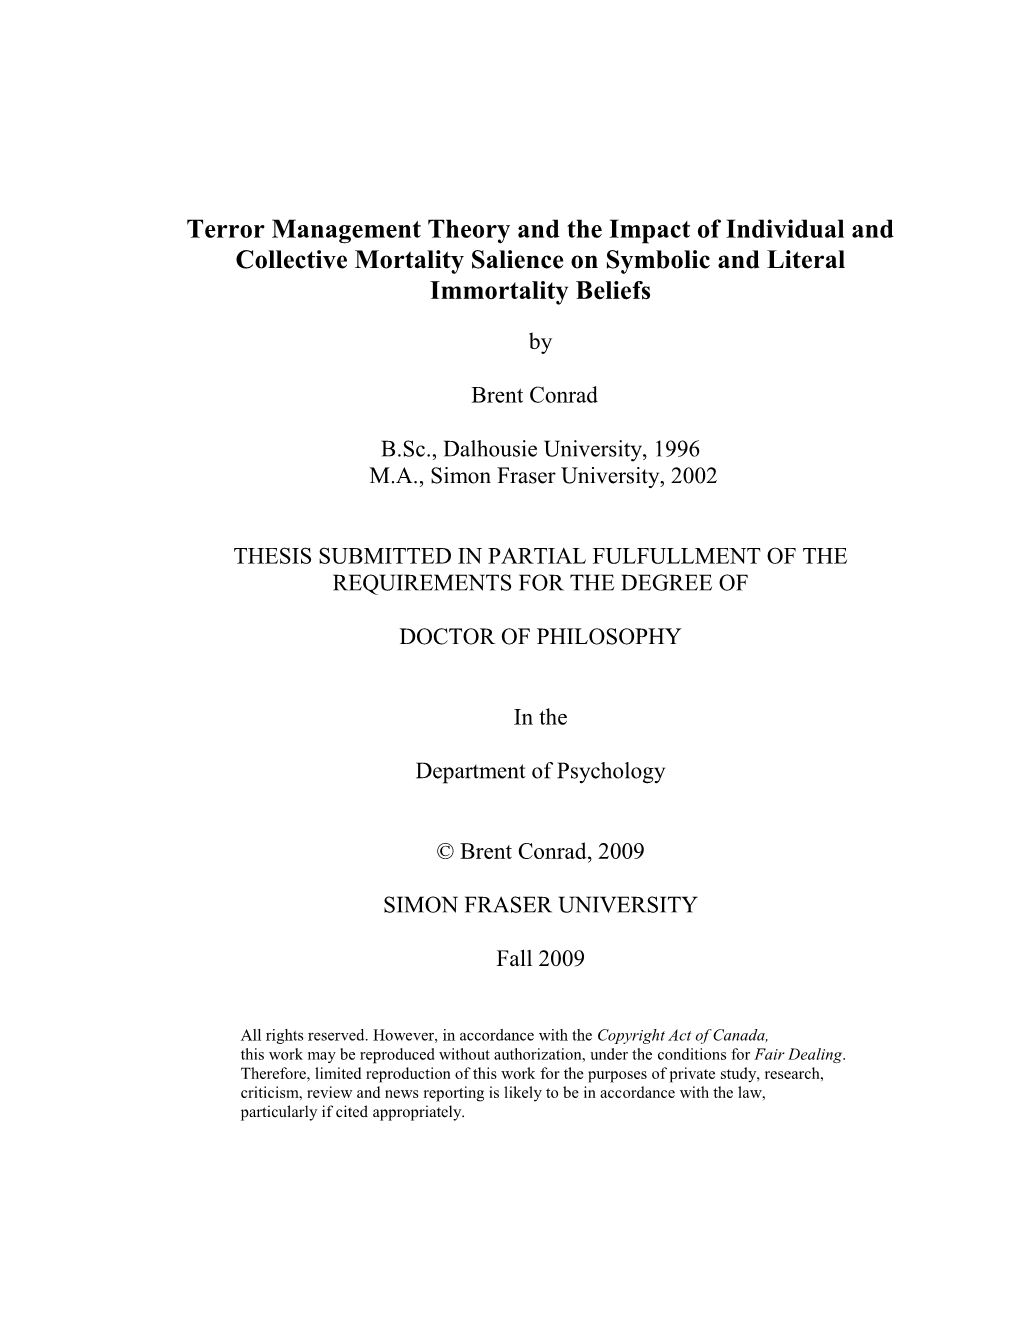 Terror Management Theory and the Impact of Individual and Collective Mortality Salience on Symbolic and Literal Immortality Beliefs